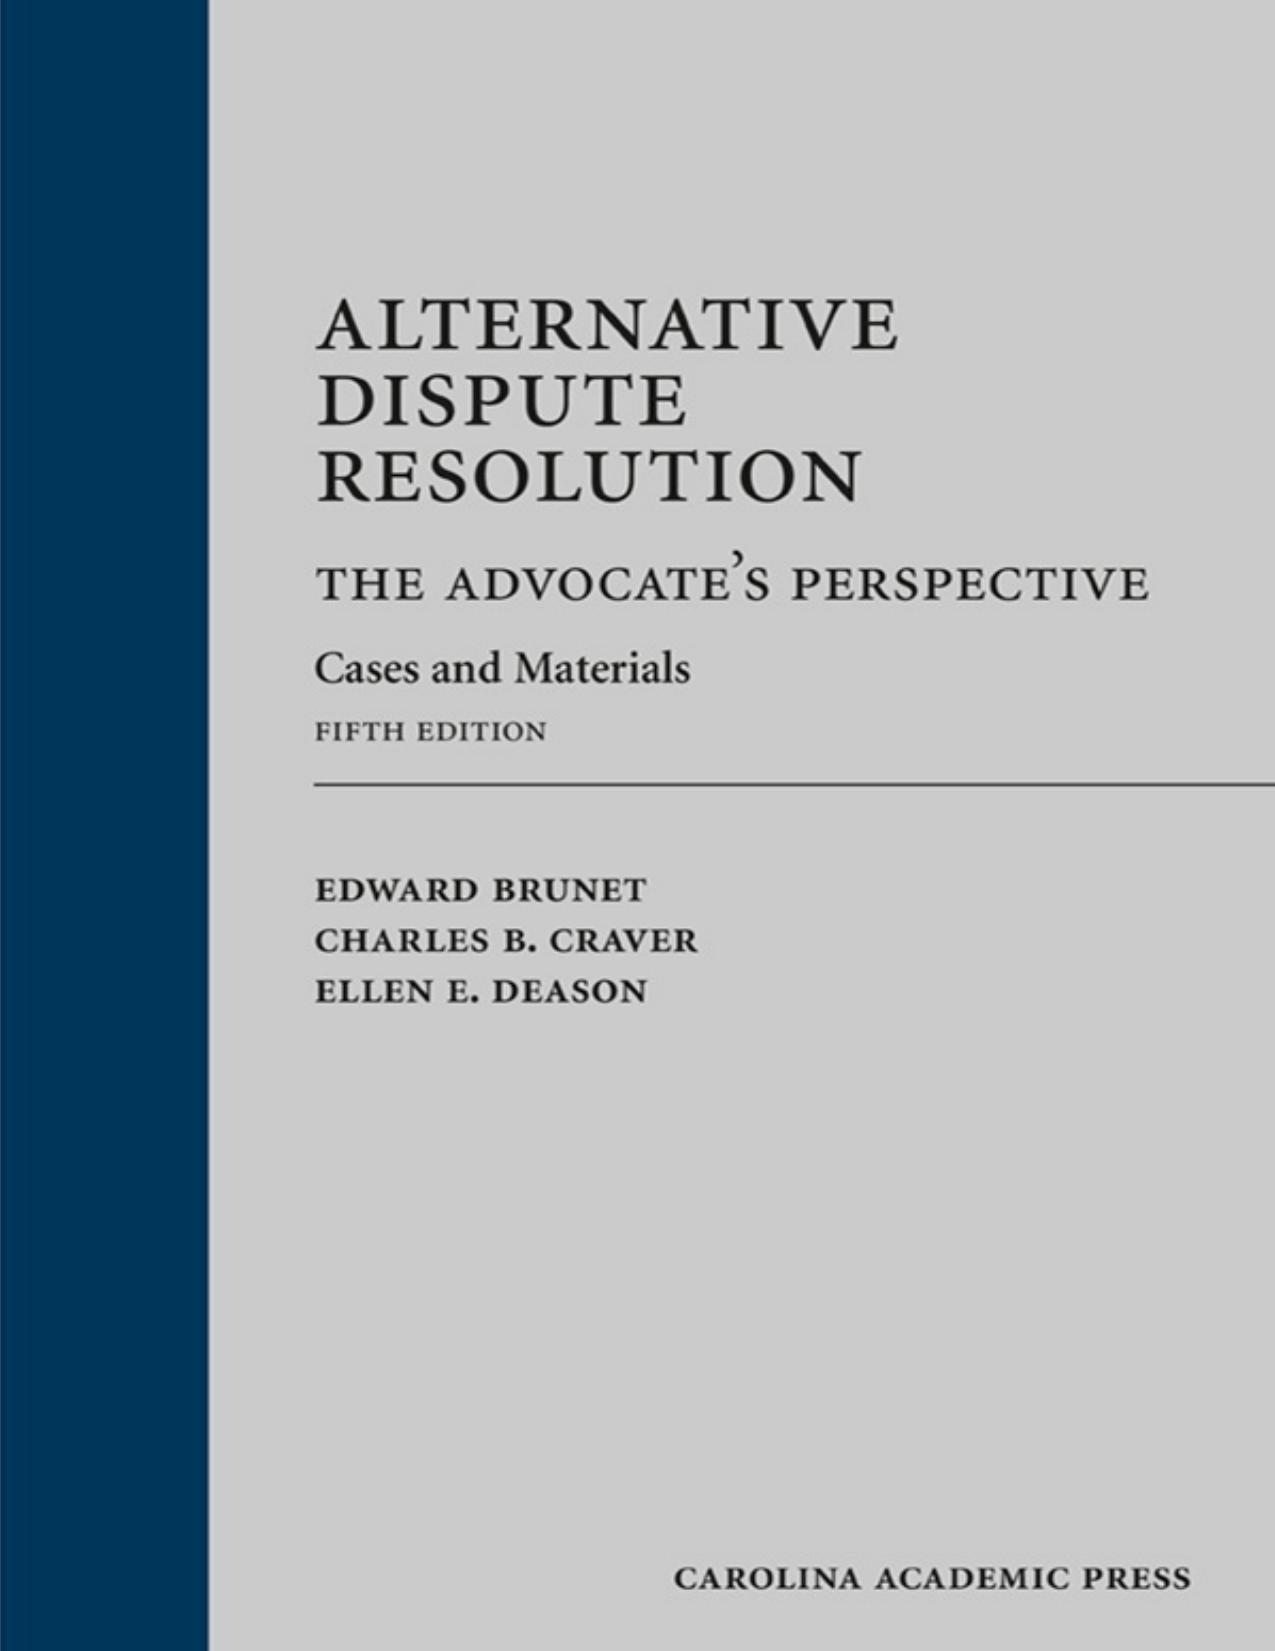 Alternative Dispute Resolution: The Advocate’s Perspective: Cases and Materials - PDFDrive.com